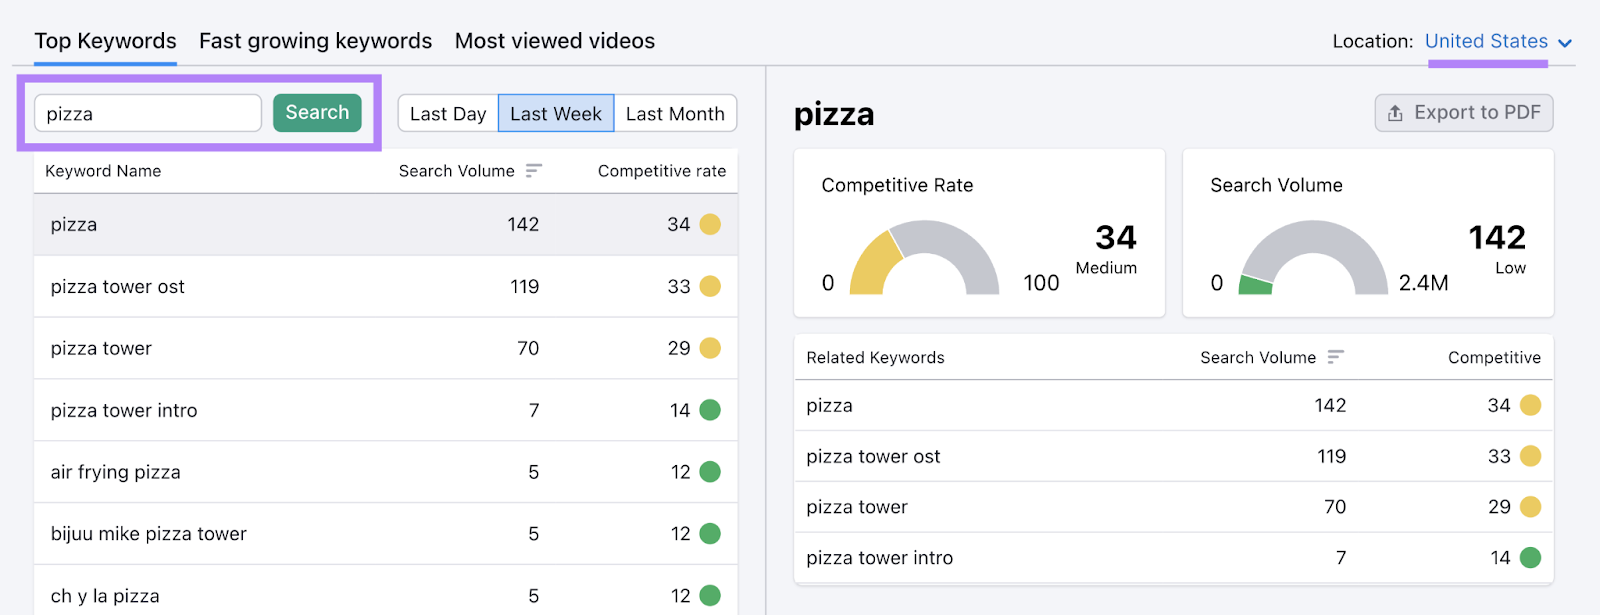 Searching for "pizza" in Keyword Analytics for YouTube